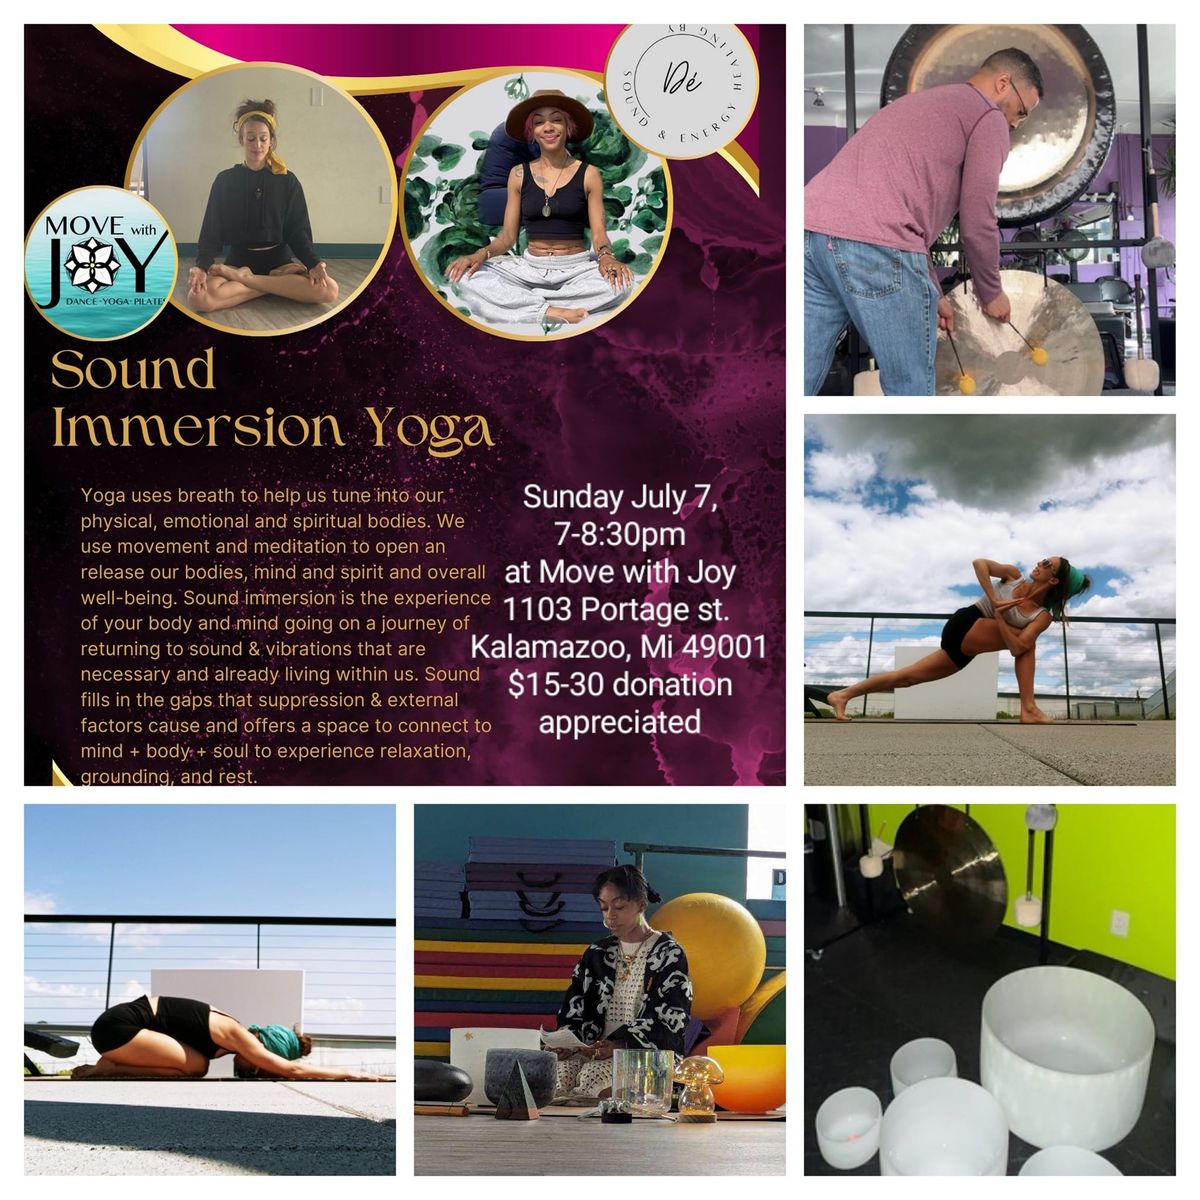 Sound Immersion Yoga, Body Mapping and Healing Sound Bath